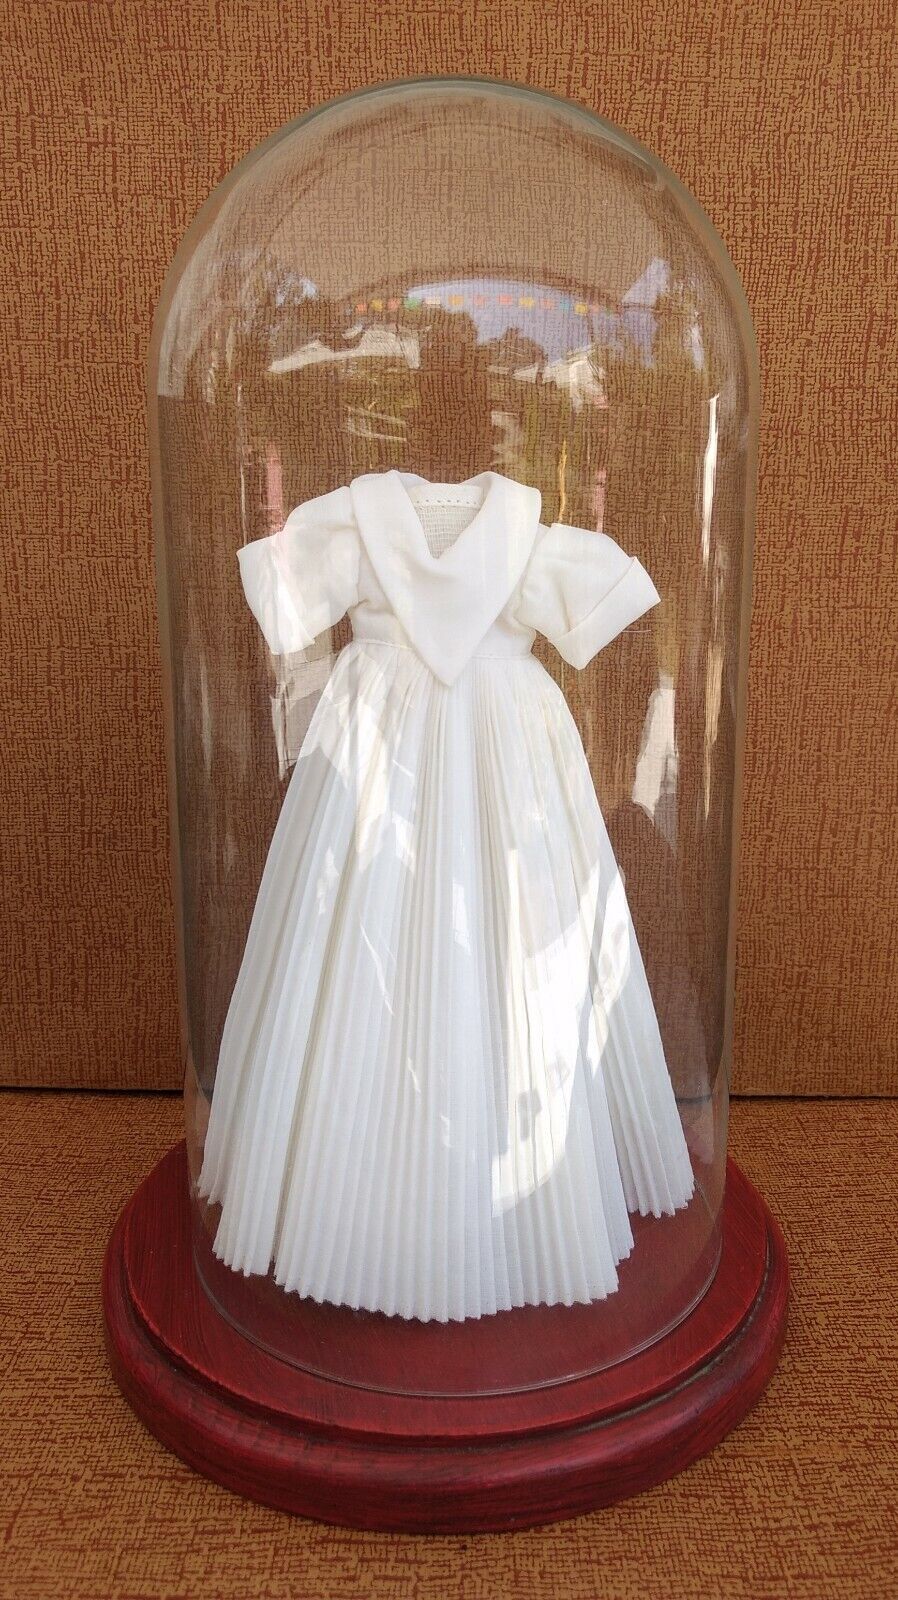 Domed Glass Display Case for Clock, Taxidermy or Doll w Christening Gown 12"x 7" Без бренда